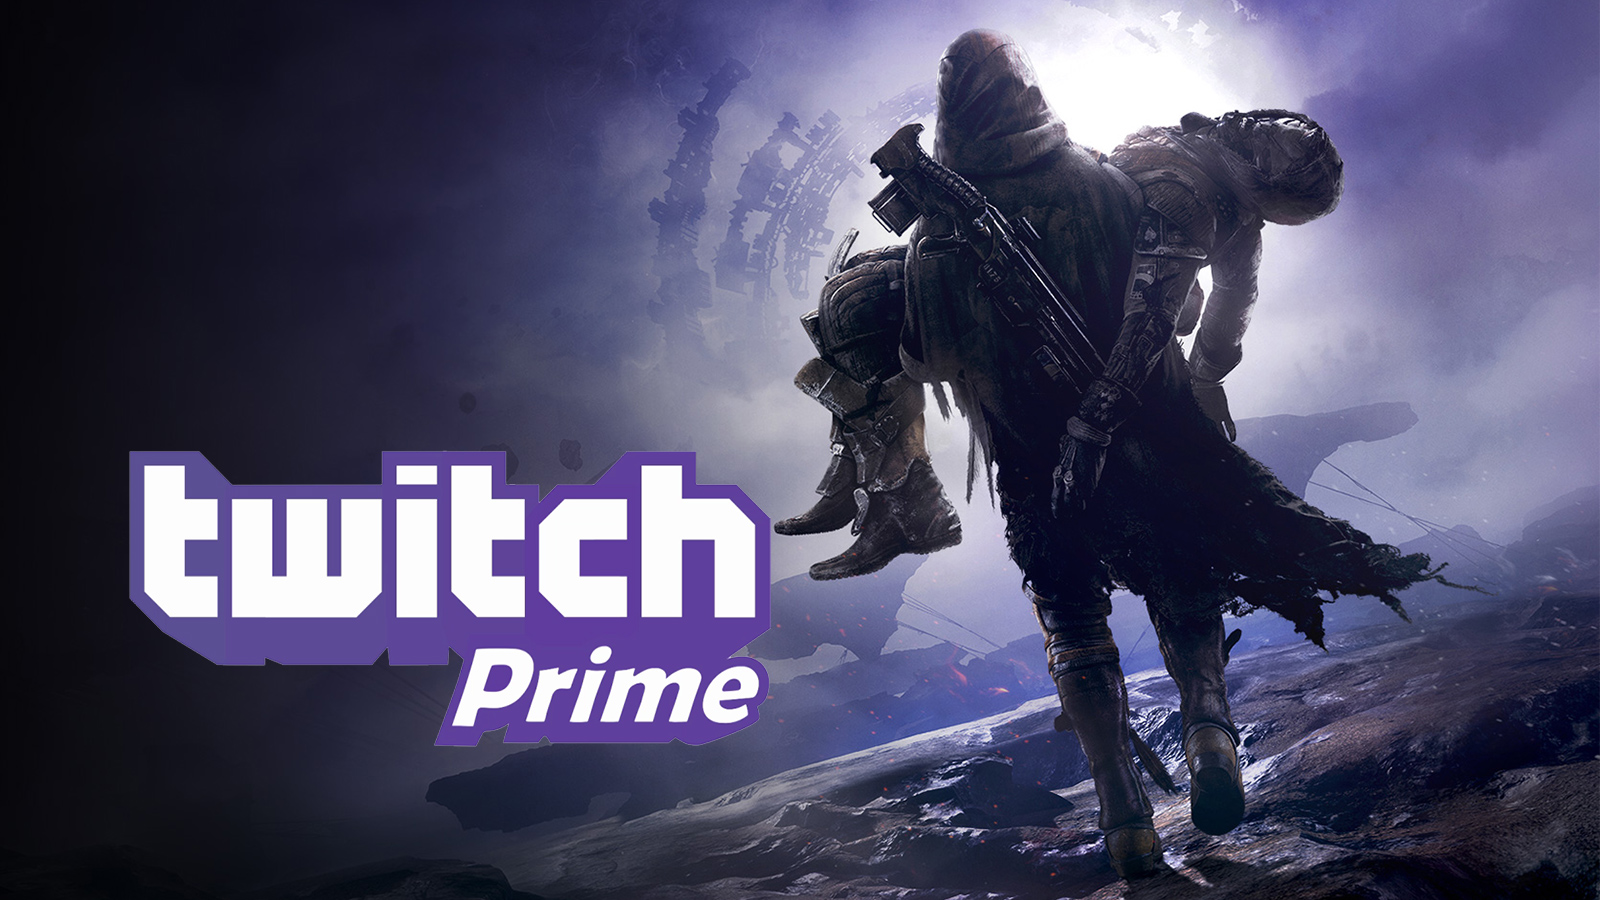 connect ubisoft to twitch prime